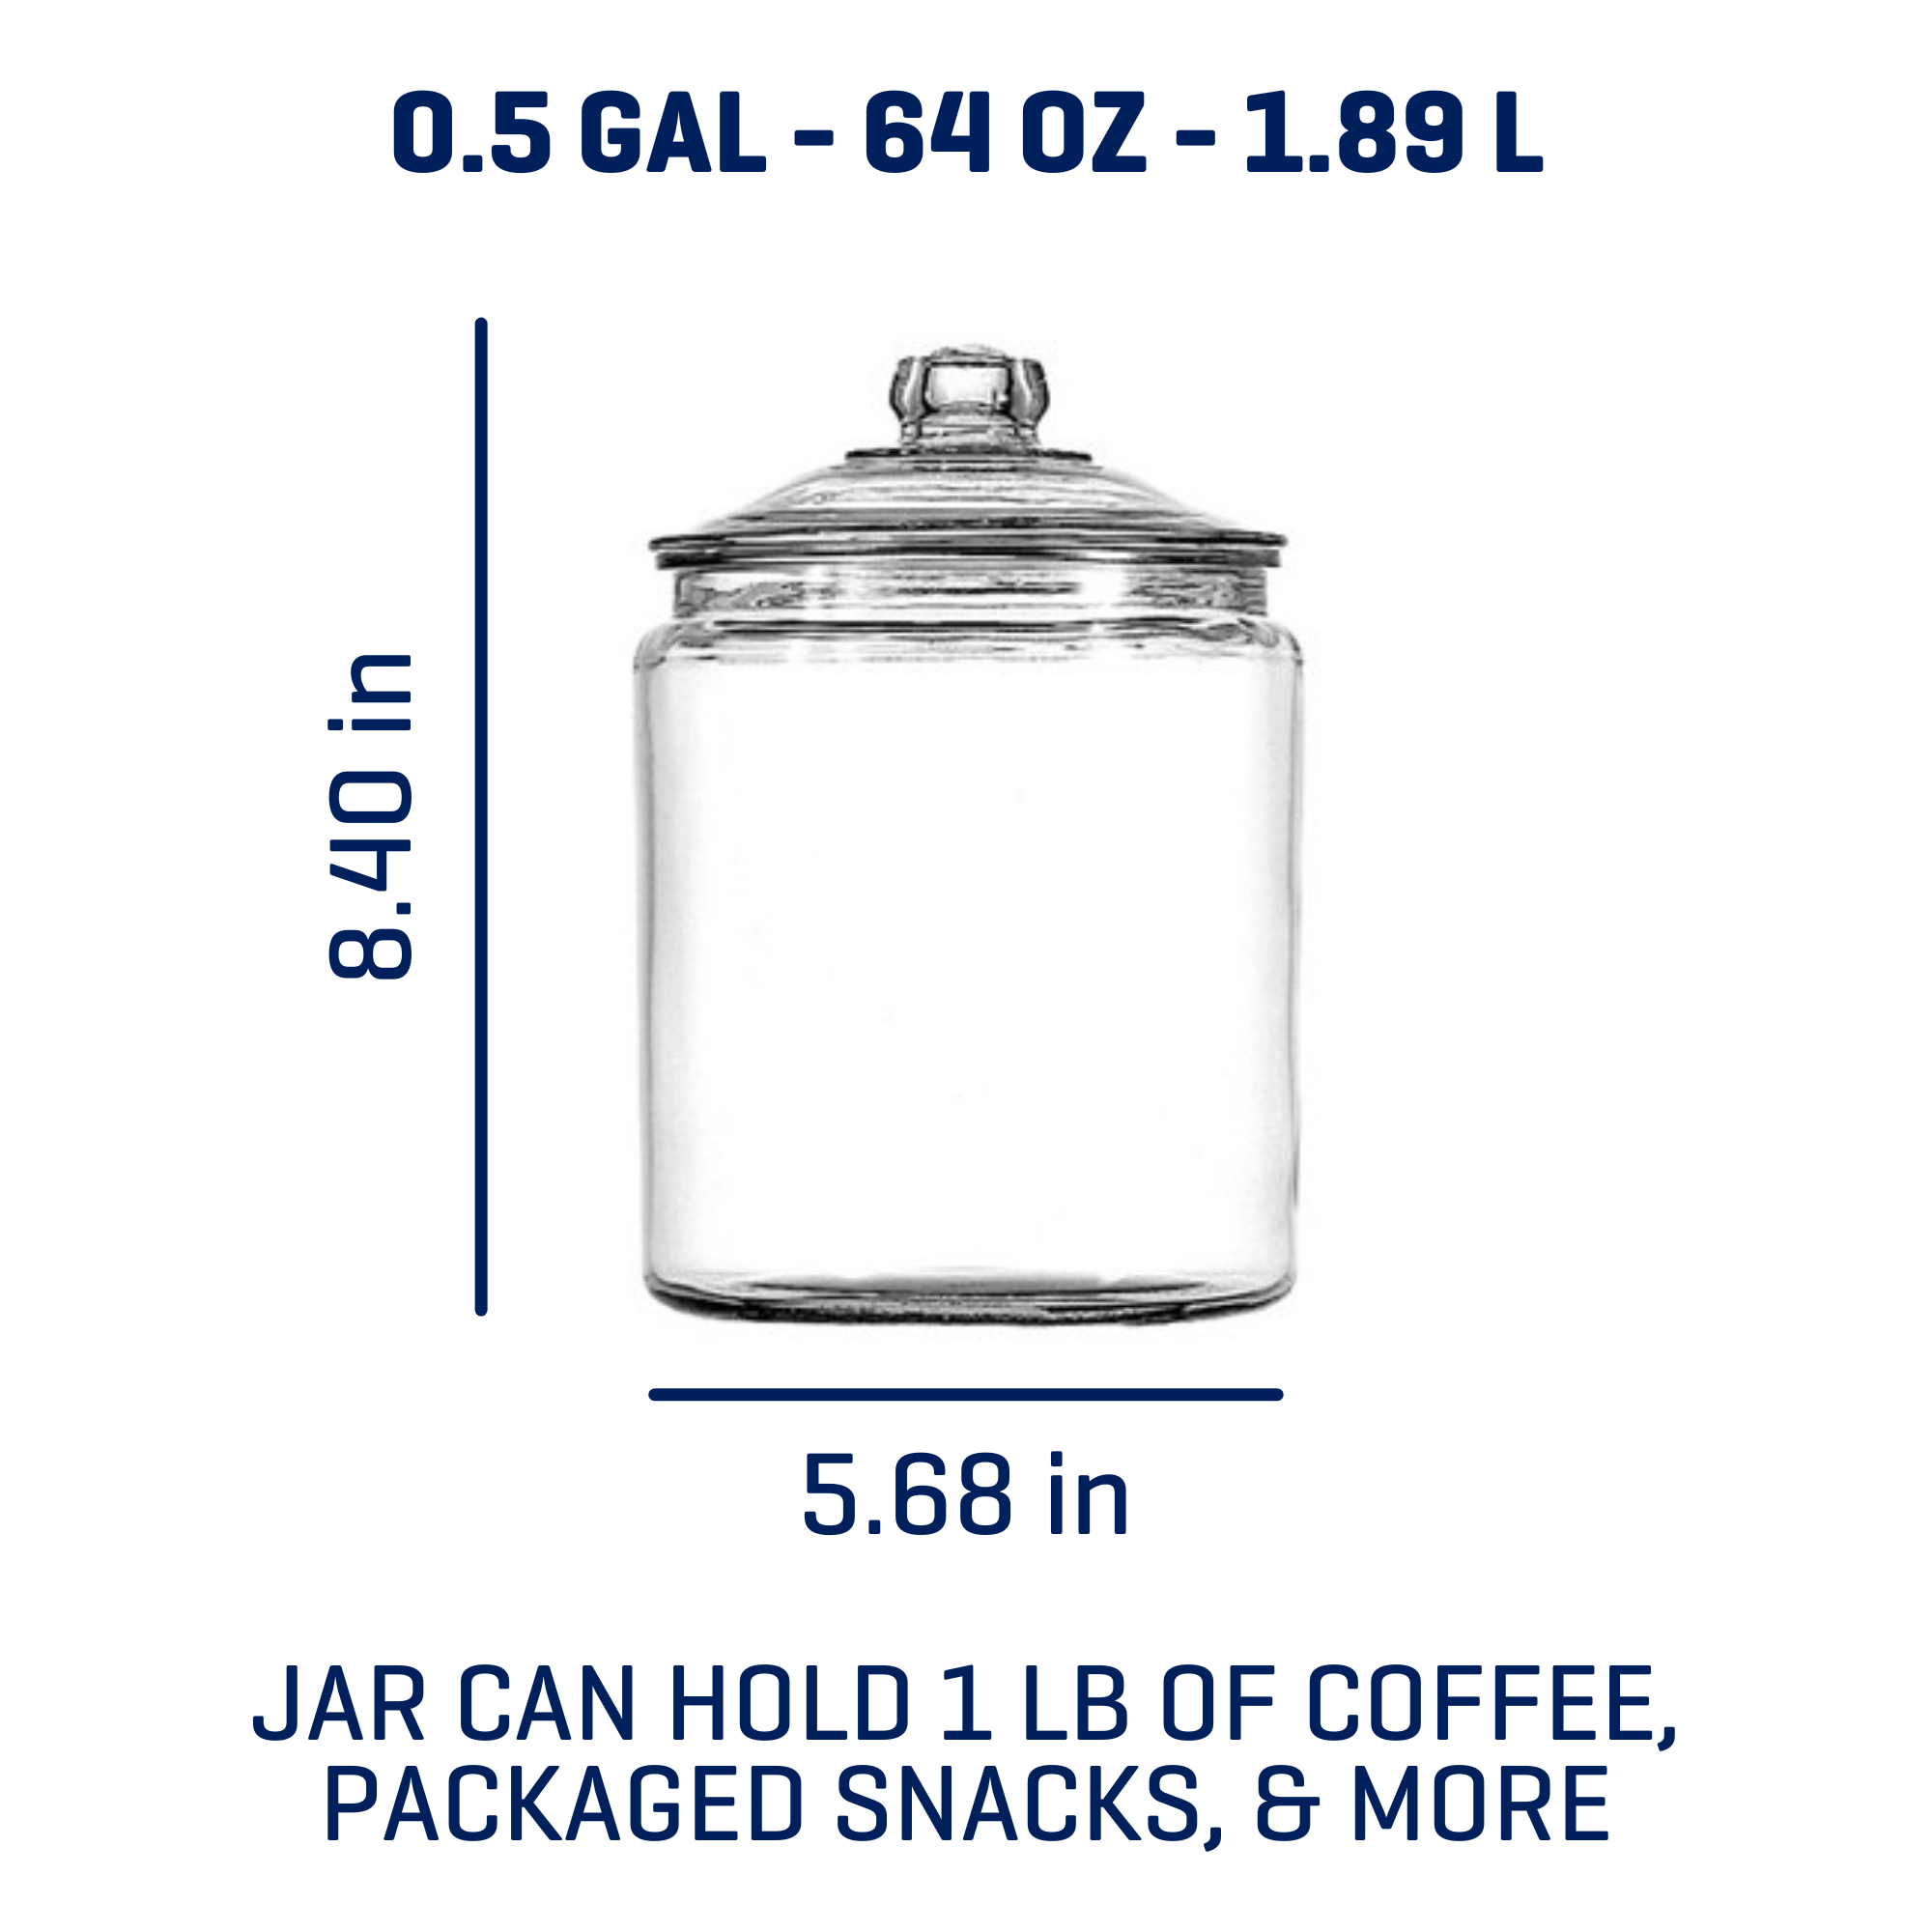 Anchor Hocking Heritage Hill Glass Jar with Lid, 1/2 Gallon - image 2 of 7